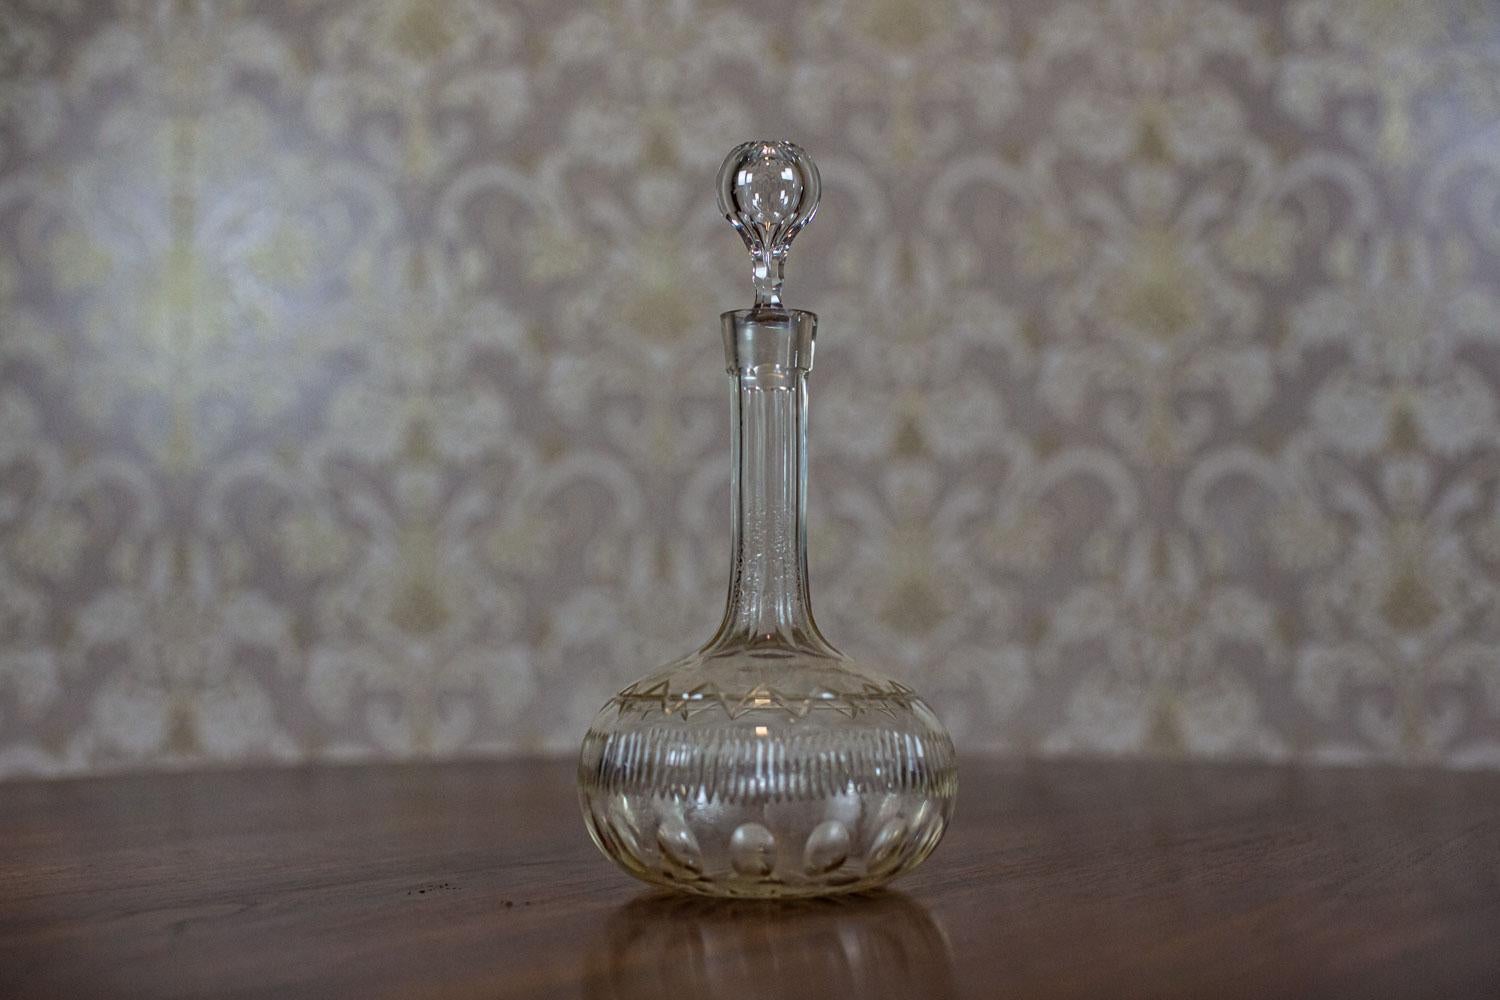 Crystal Liquor Decanter from the Interwar Period

We present you this crystal decanter from the Interwar Period.

The item is in incredibly good condition and undamaged.